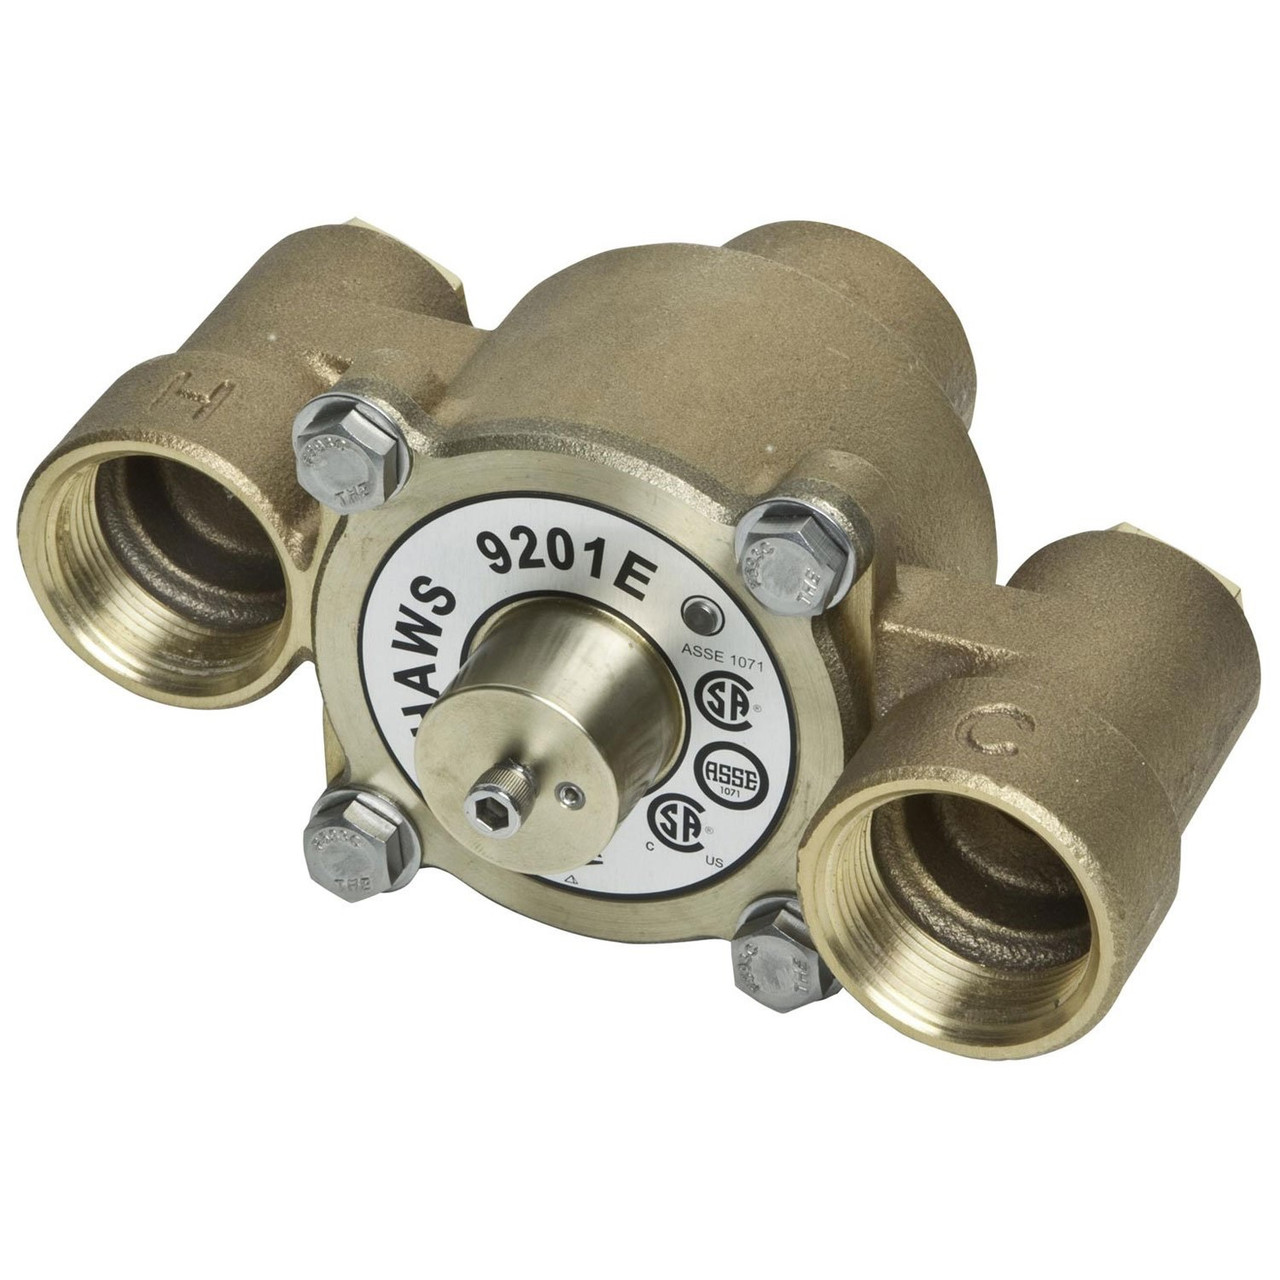 Haws 9201E Emergency Thermostatic Mixing Valve, 31 gpm Flow Rate